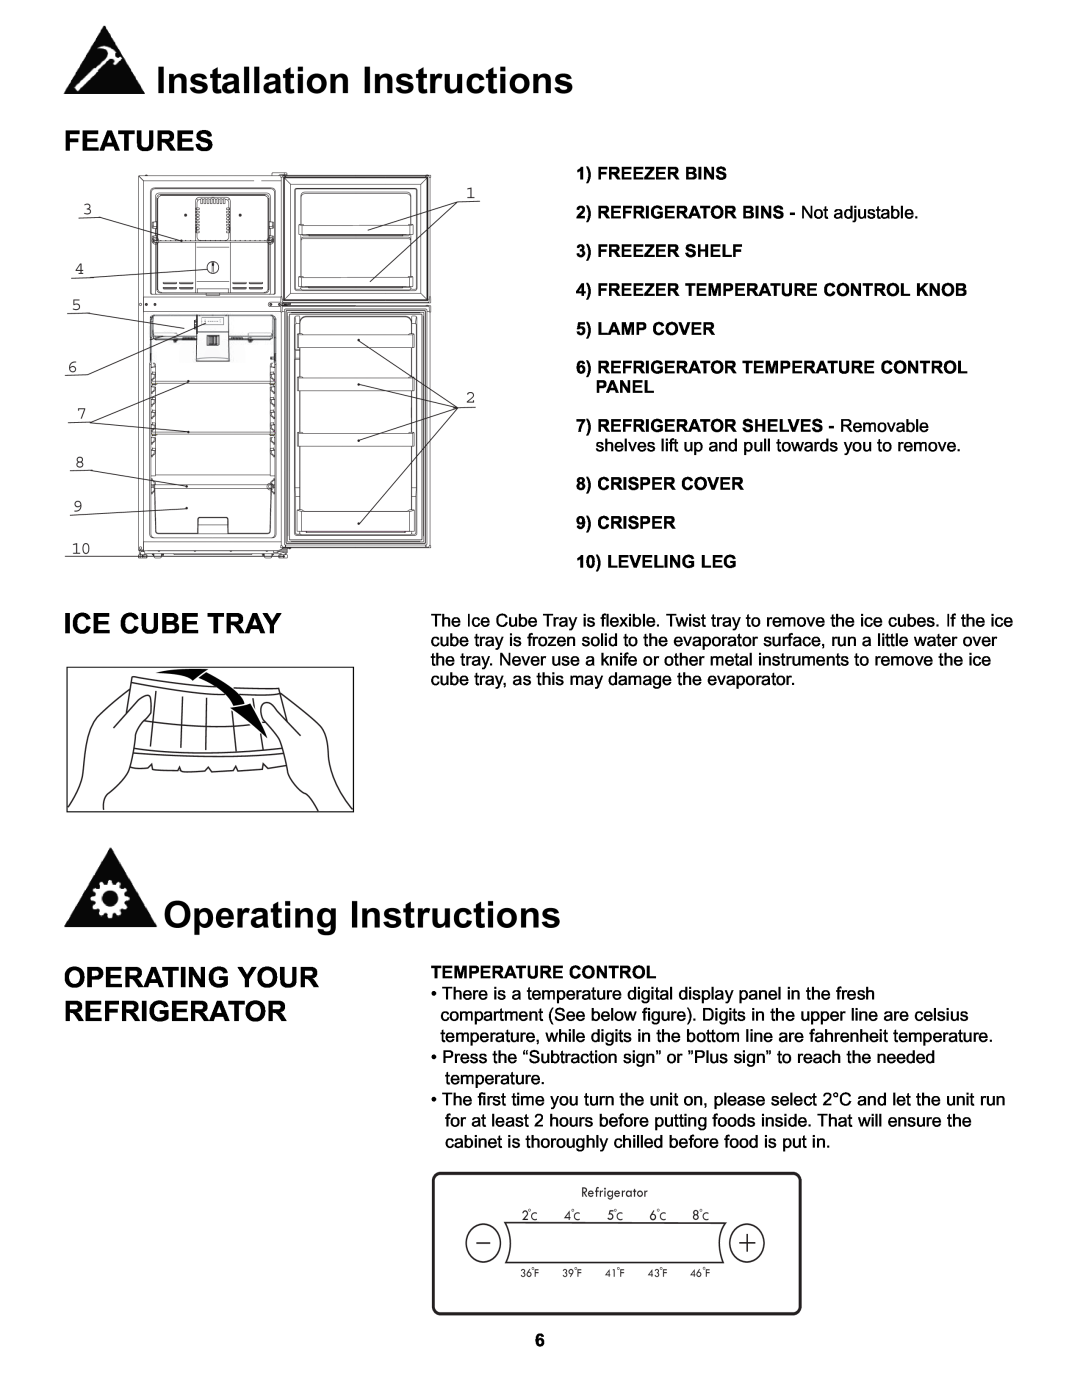 Danby DFF100A2WDB Operating Instructions, Features, Ice Cube Tray, Operating Your Refrigerator, Installation Instructions 